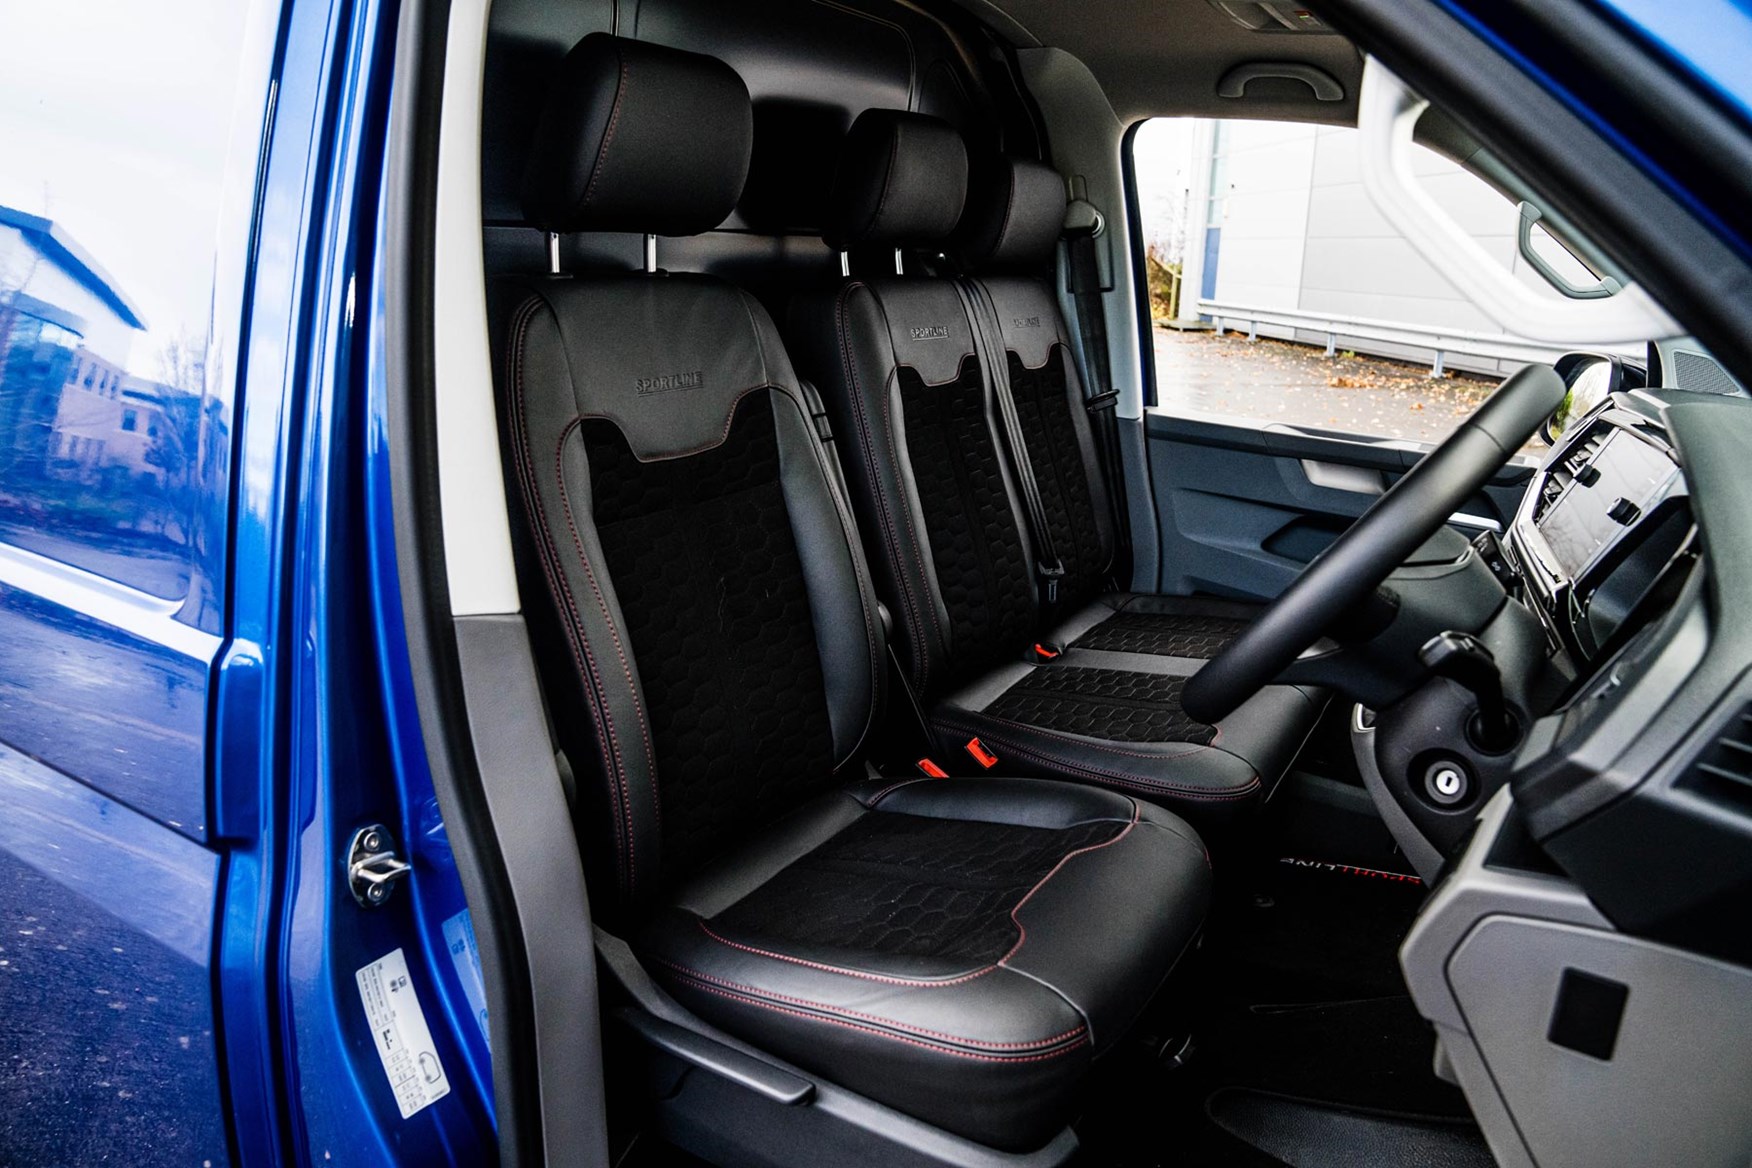 VW Transporter gets notable upgrades to the cabin.